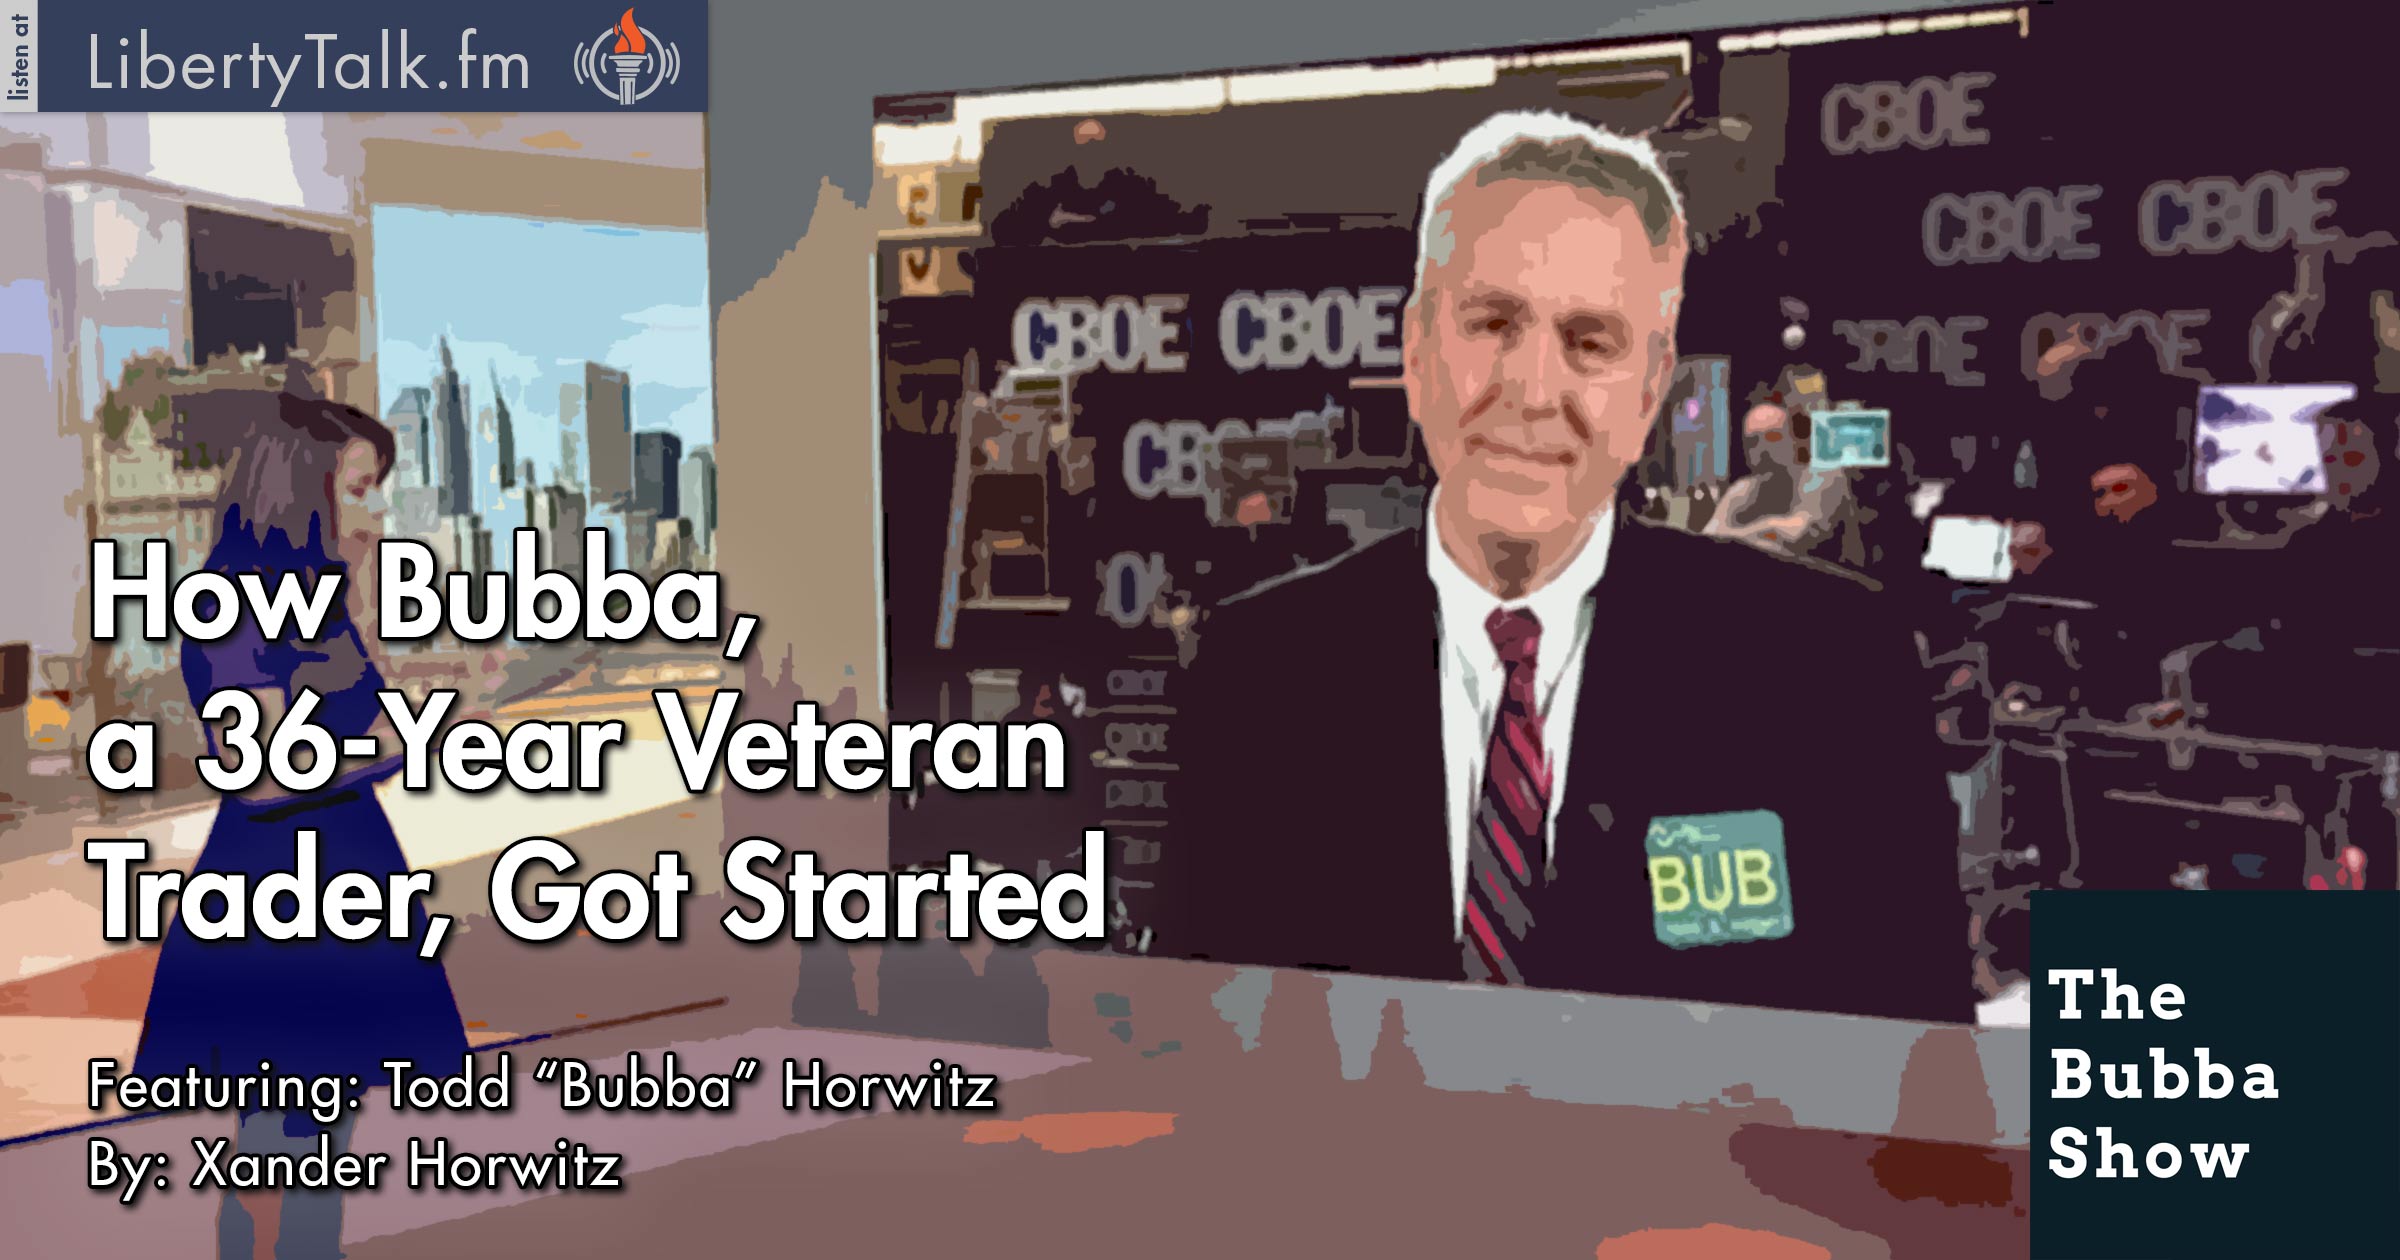 How “Bubba”, a 36-Year Veteran Trader, Got Started - The Bubba Show